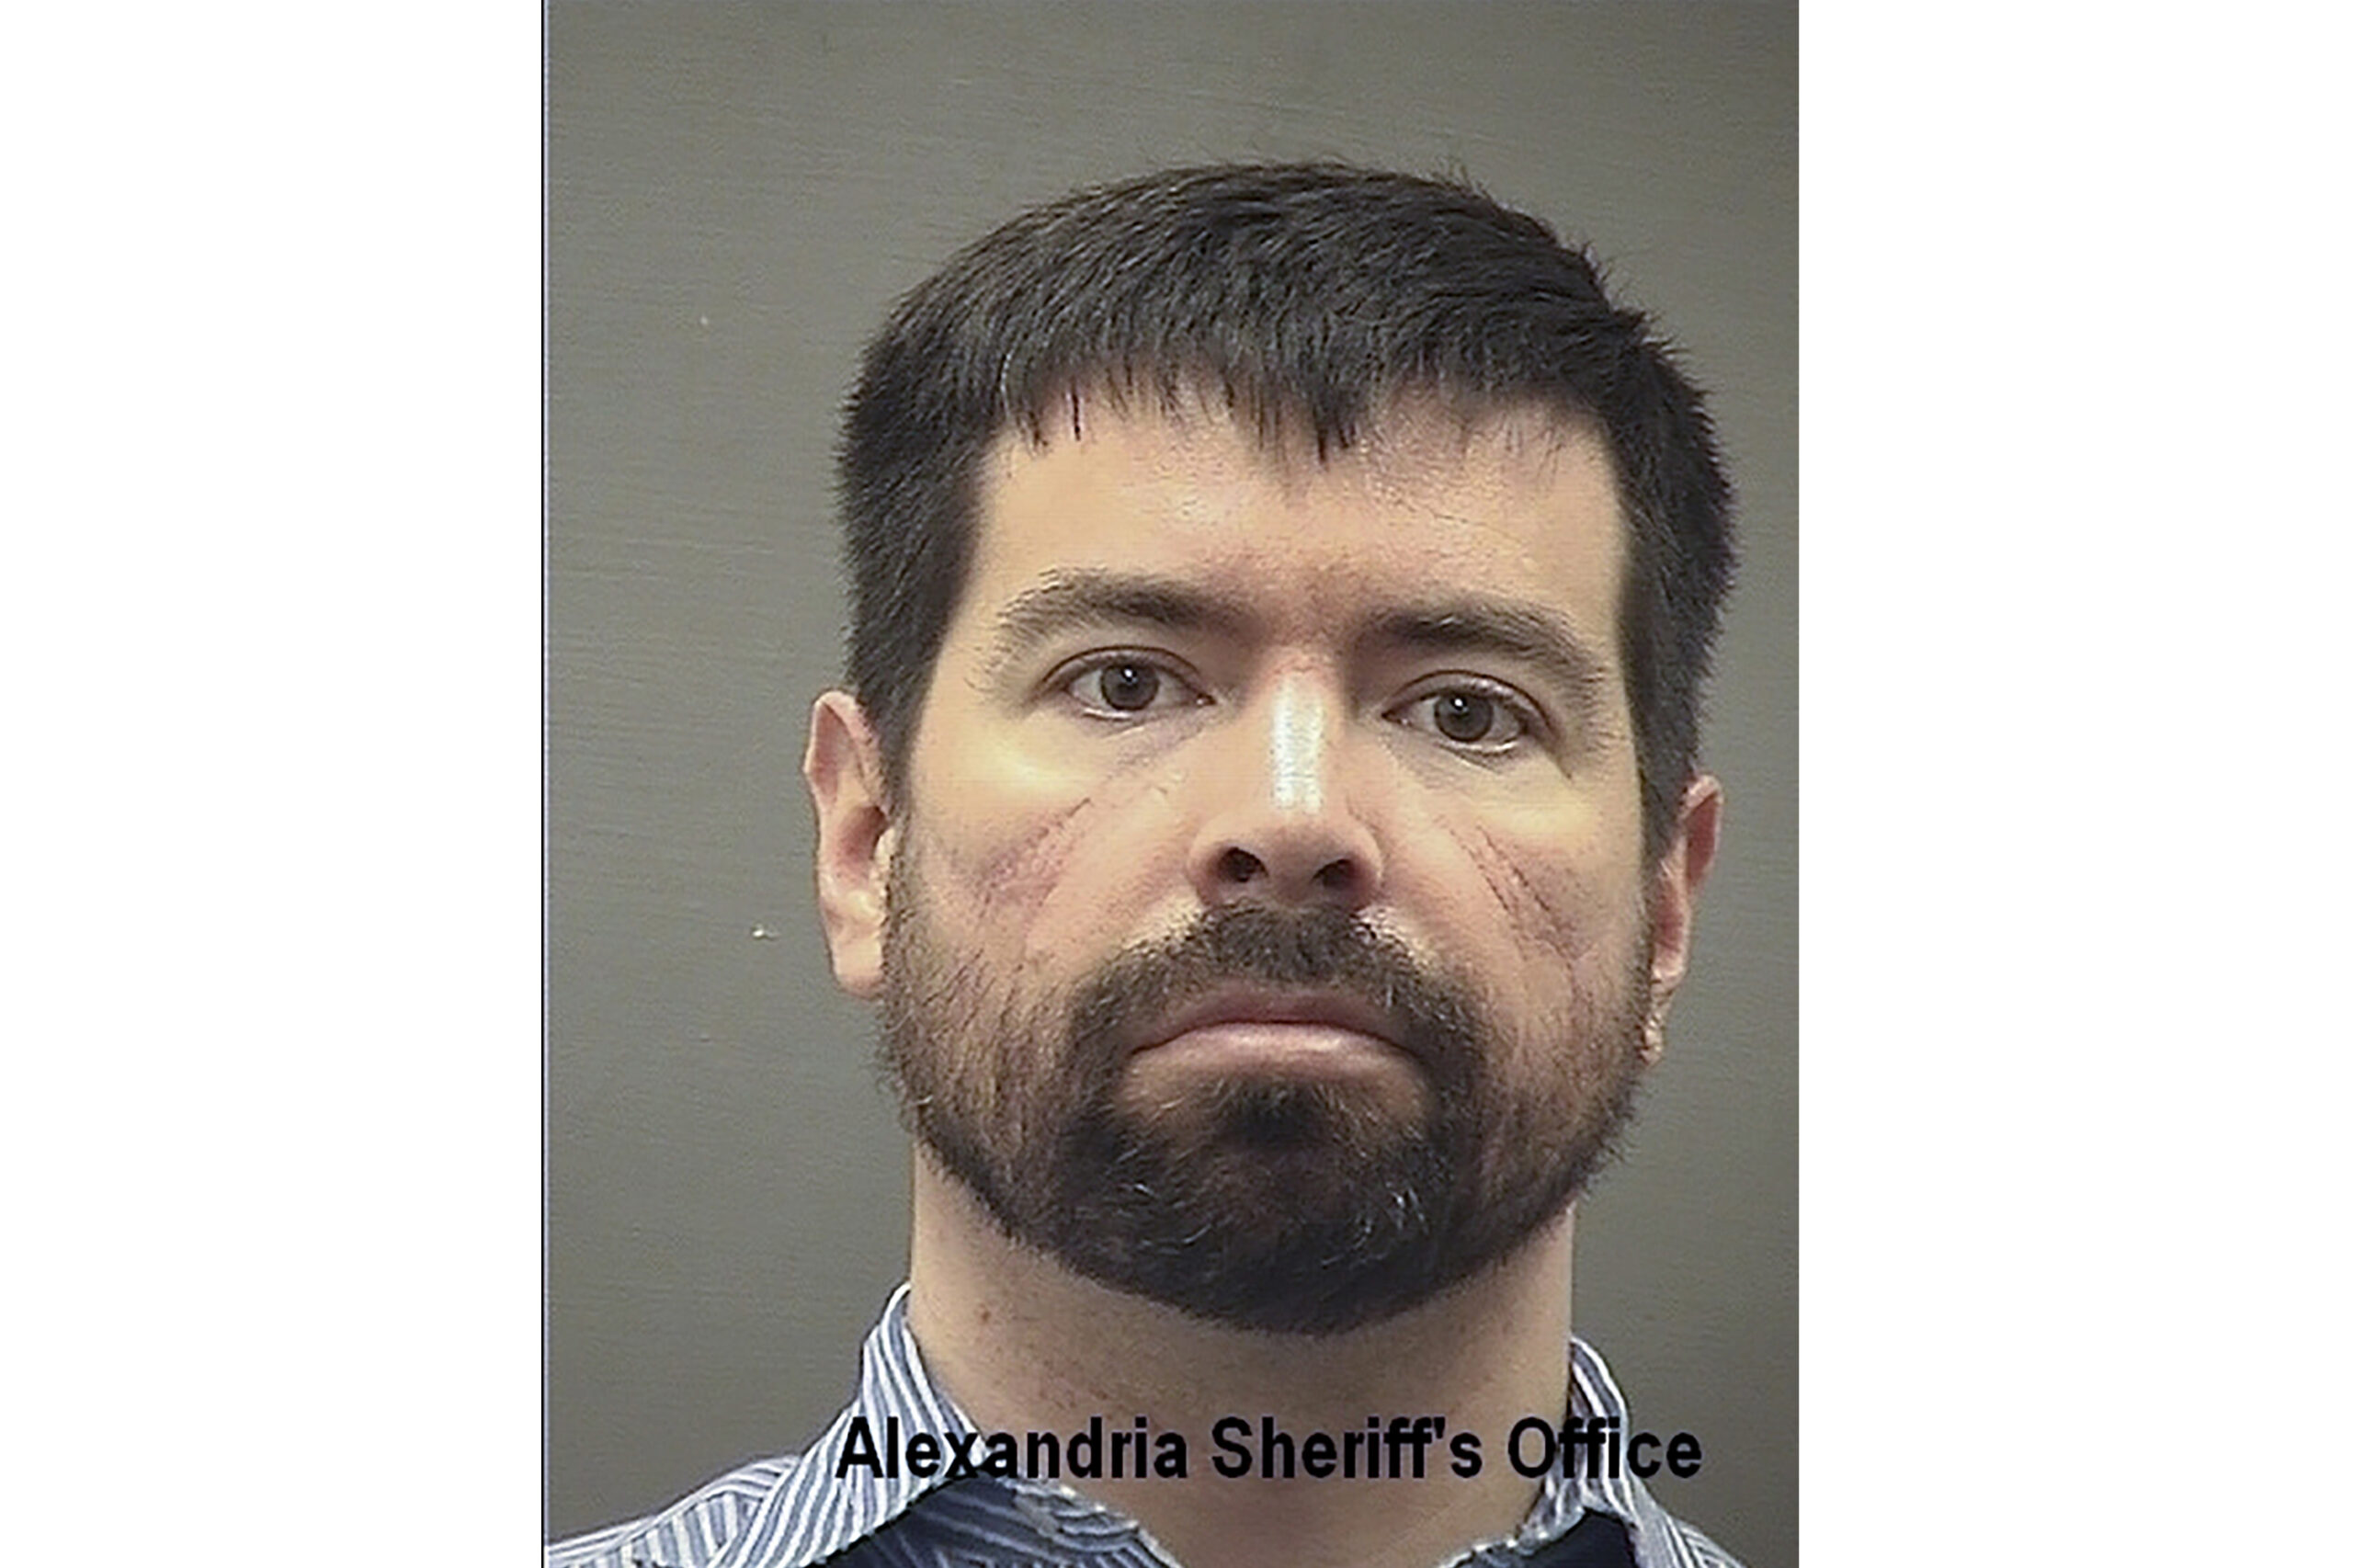 FILE - This booking photo provided by the Alexandria, Va., Sheriff's Office shows Hatchet Speed. Sp...